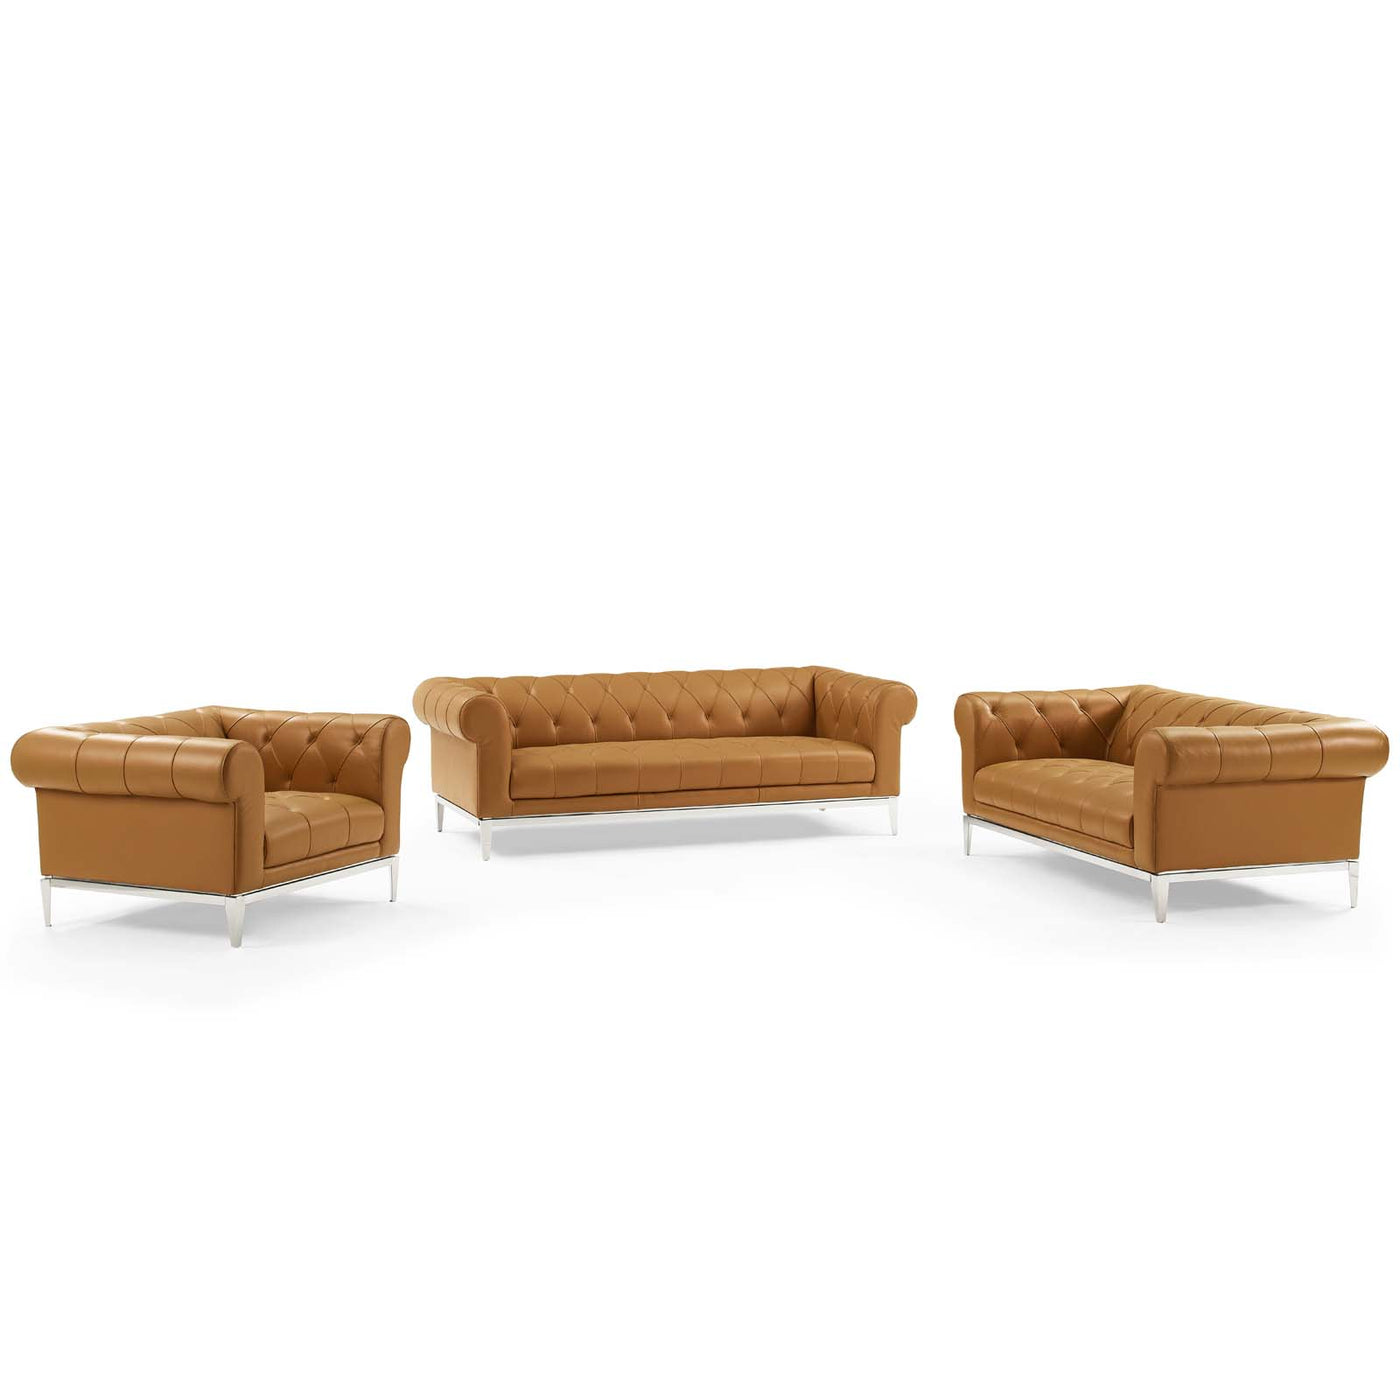 Idyll 3 Piece Upholstered Leather Set